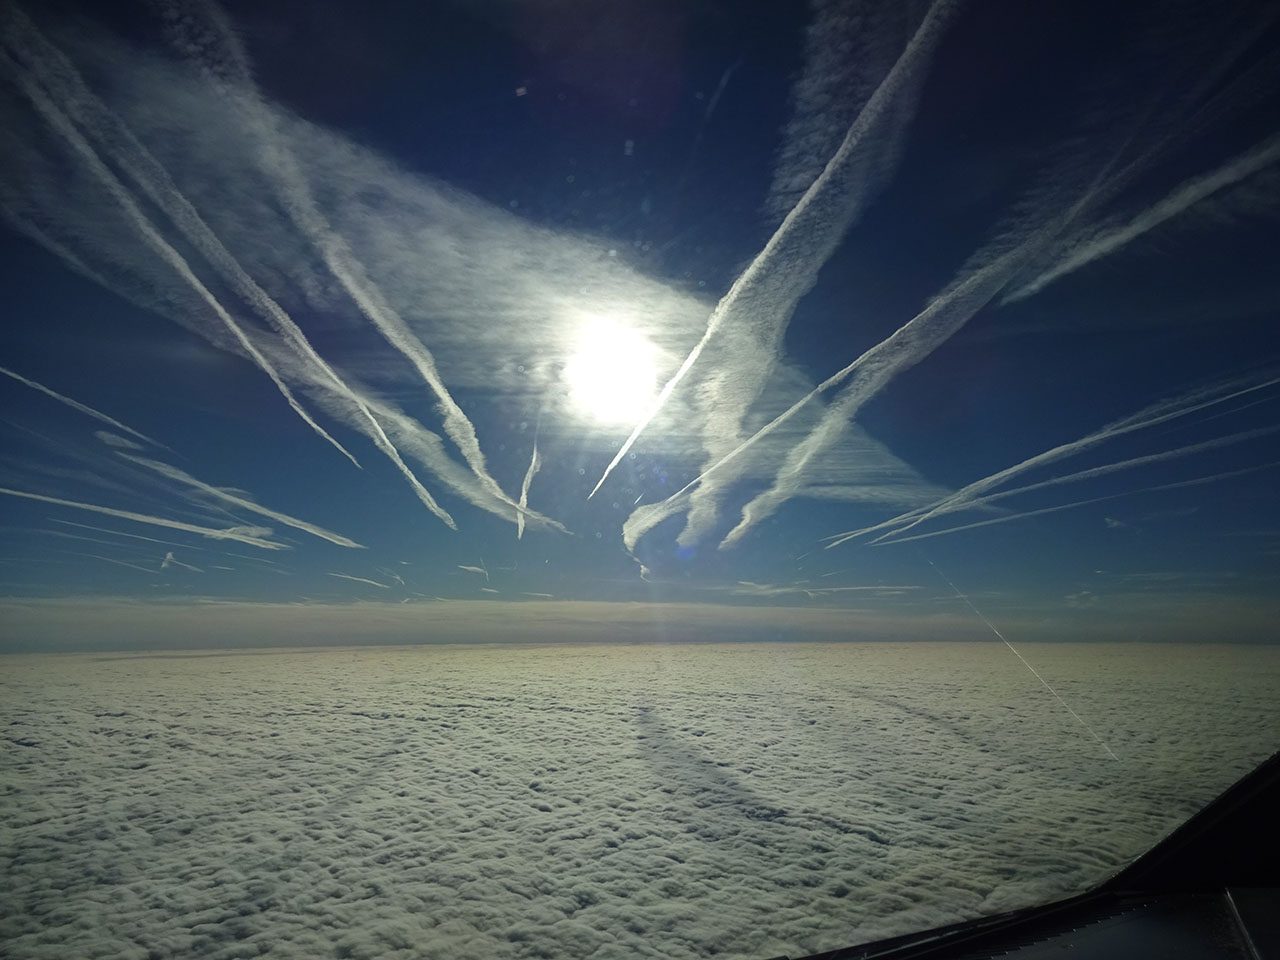 THIRD PLACE: Contrails, Contrails, And More Contrails by Greg Pfeil